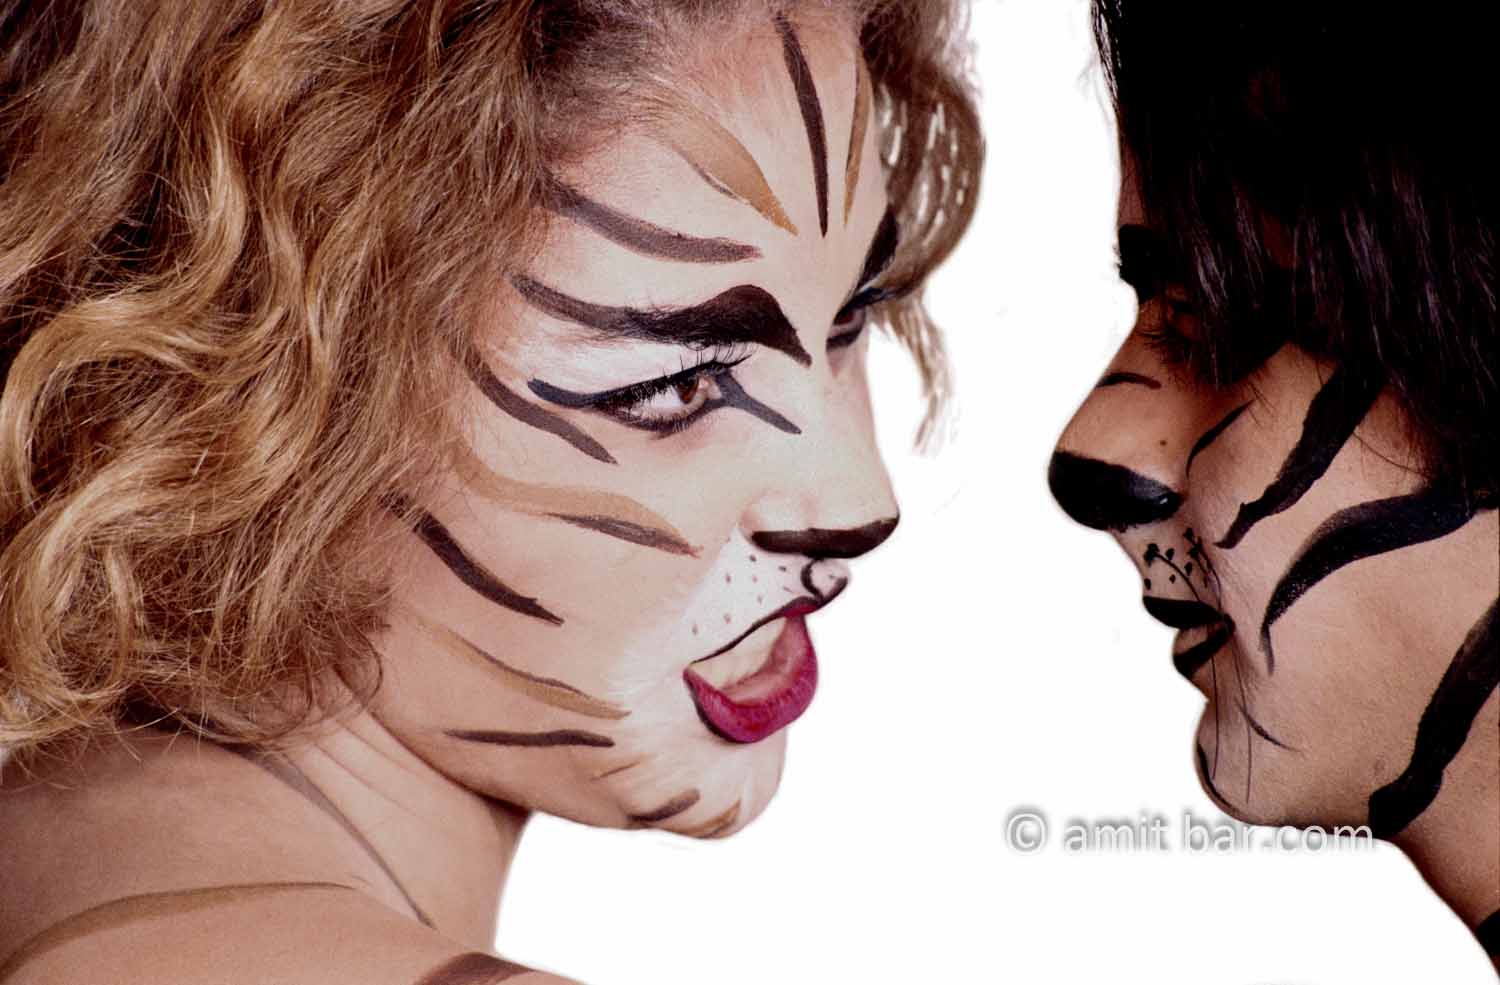 Tigers I: Male and female body-painted models in tigers stripes